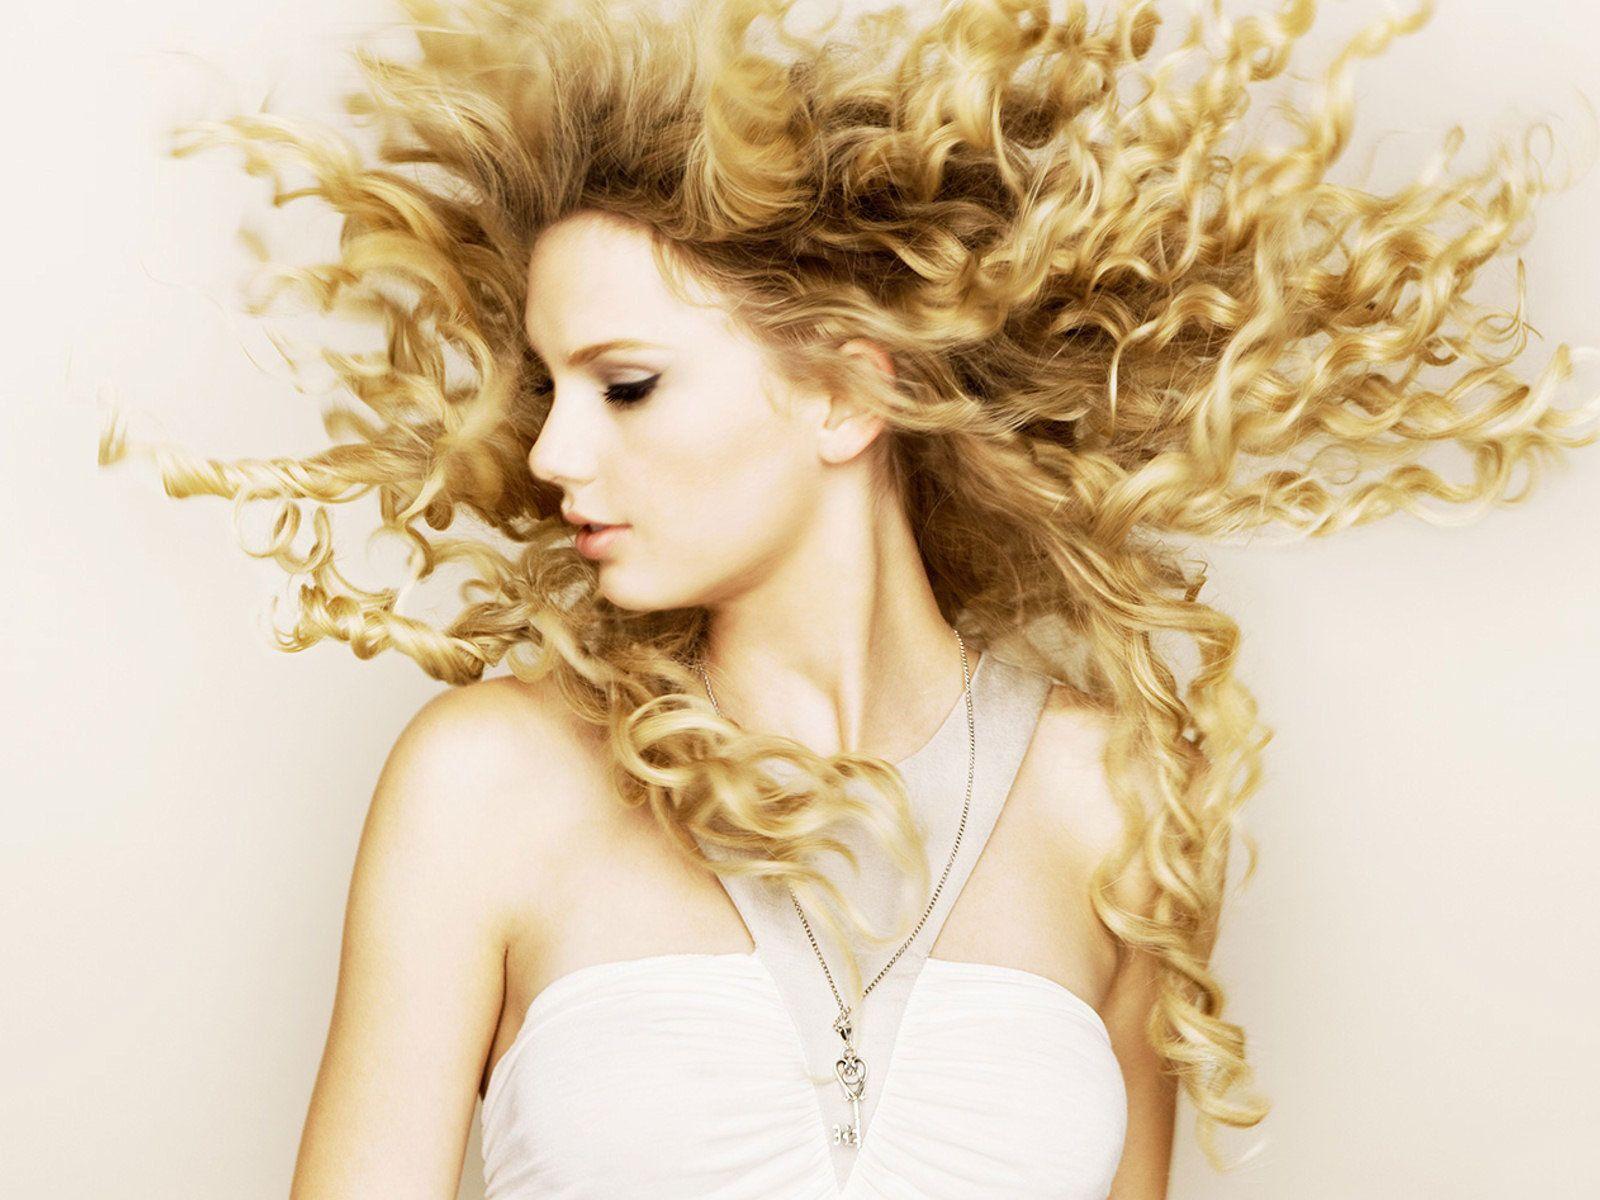 Taylor Swift Fearless Wallpapers Top Free Taylor Swift Fearless Backgrounds Wallpaperaccess